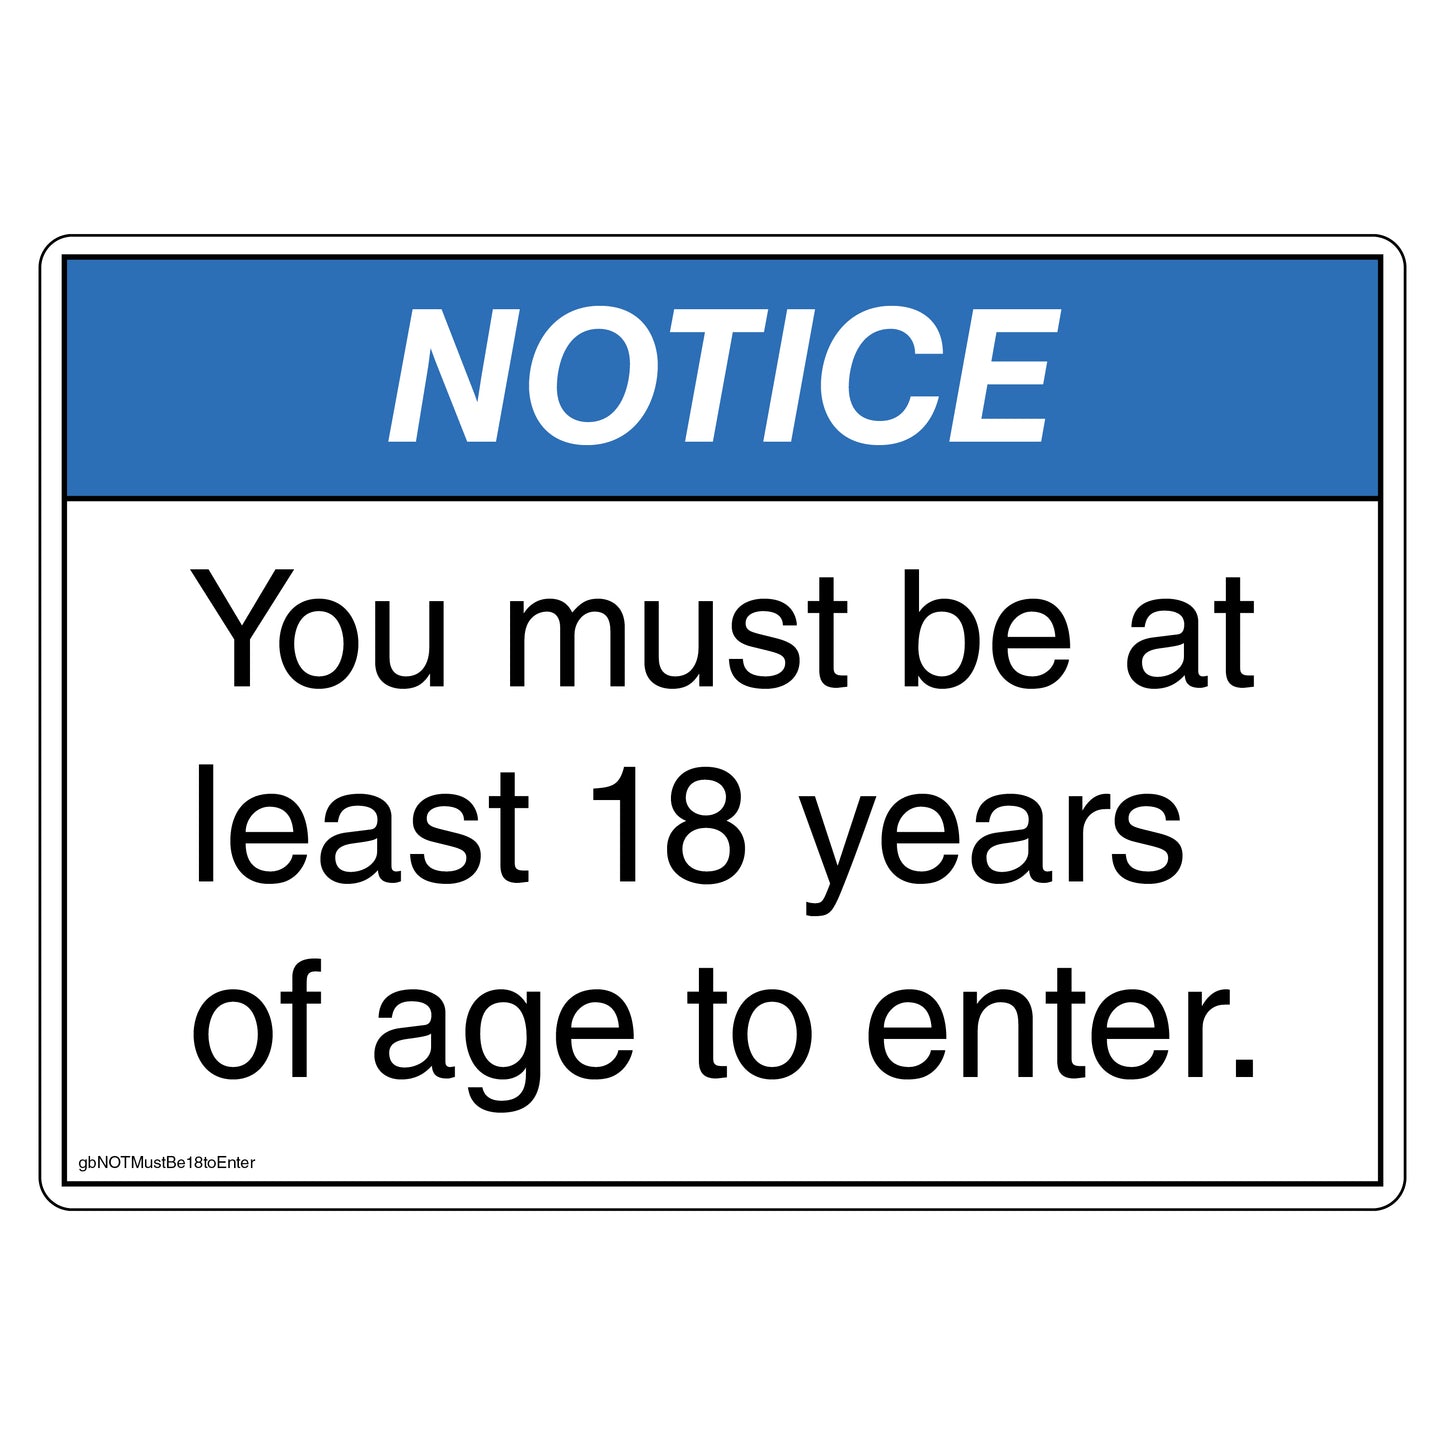 Notice: you must be at least 18 years of age to enter decal.